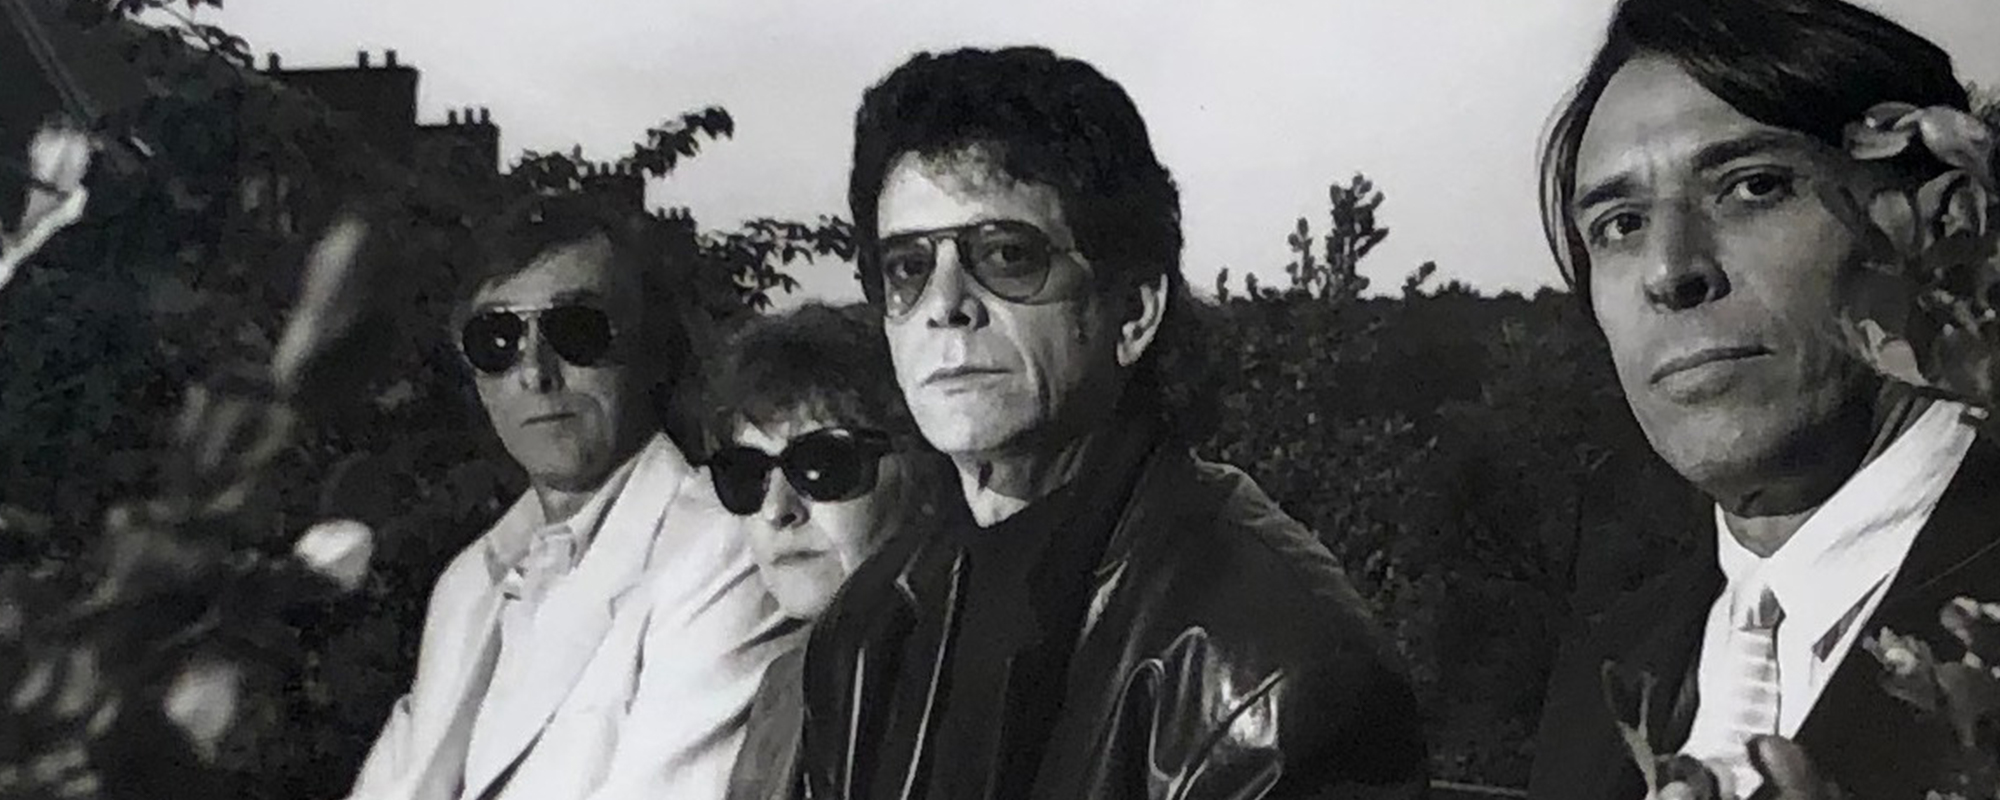 Lou Reed Archive Series to Roll Out Rare and Unreleased Material from the Godfather of Punk